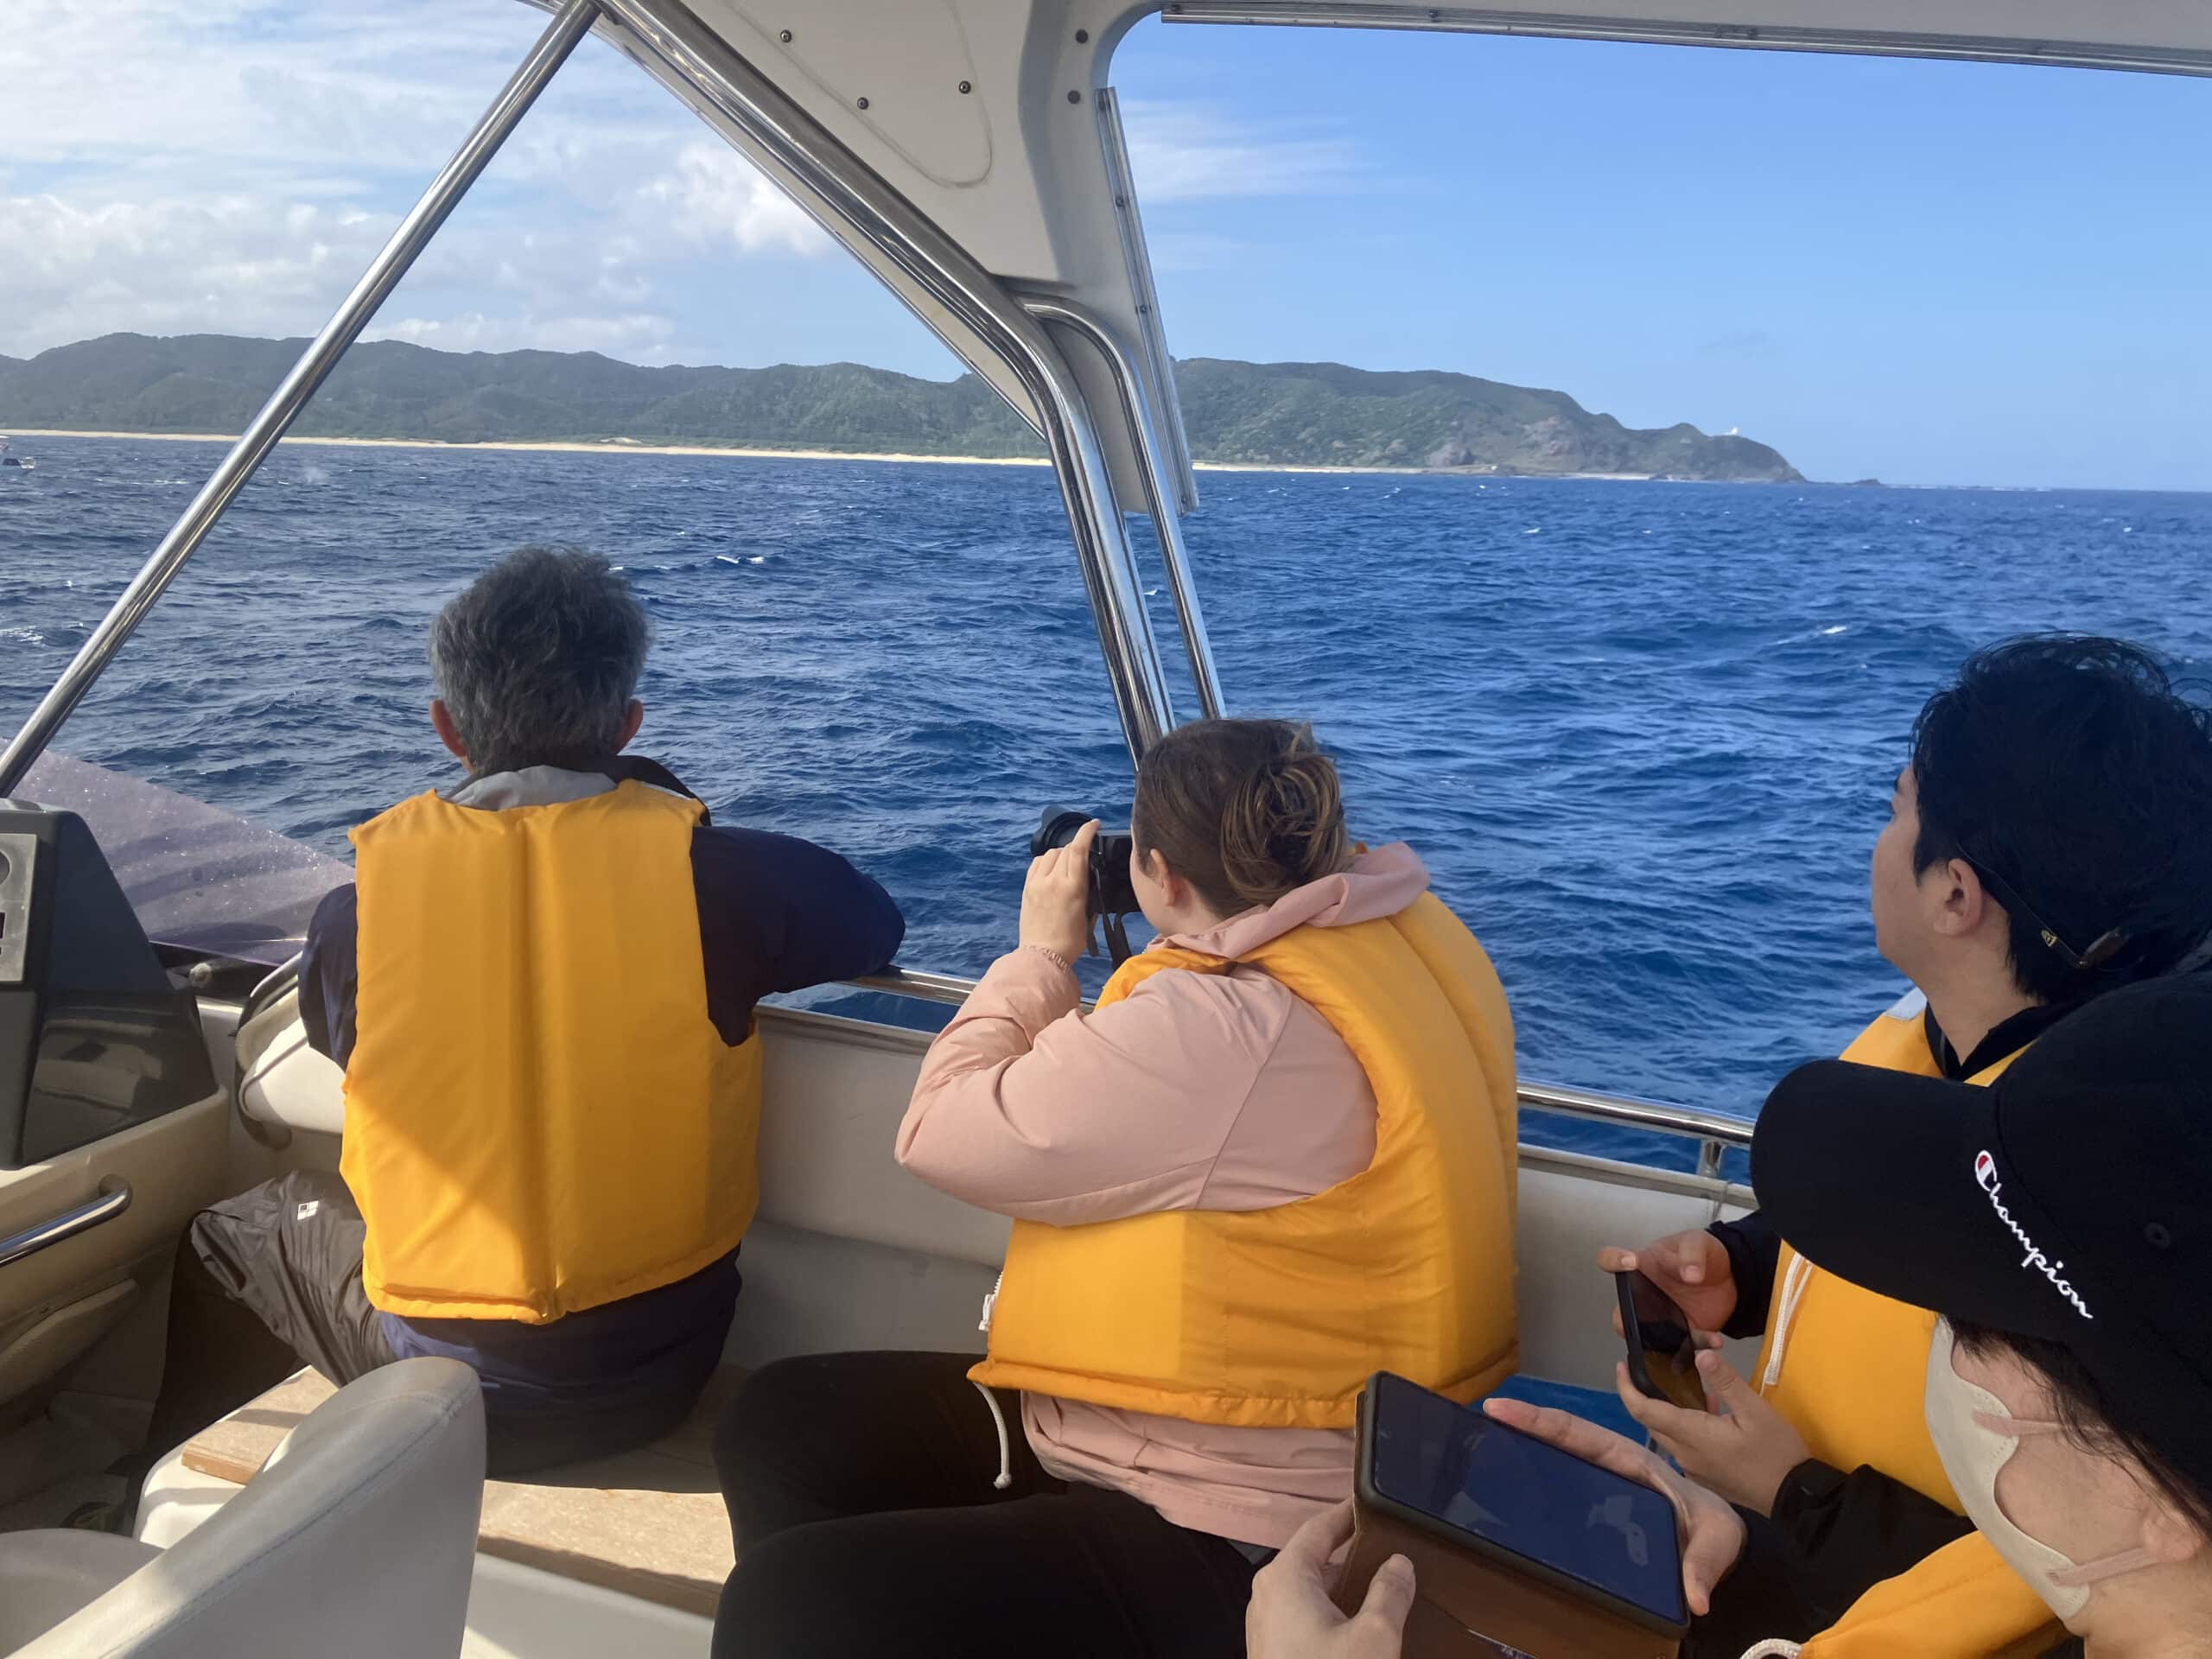 Participants searching for whales.